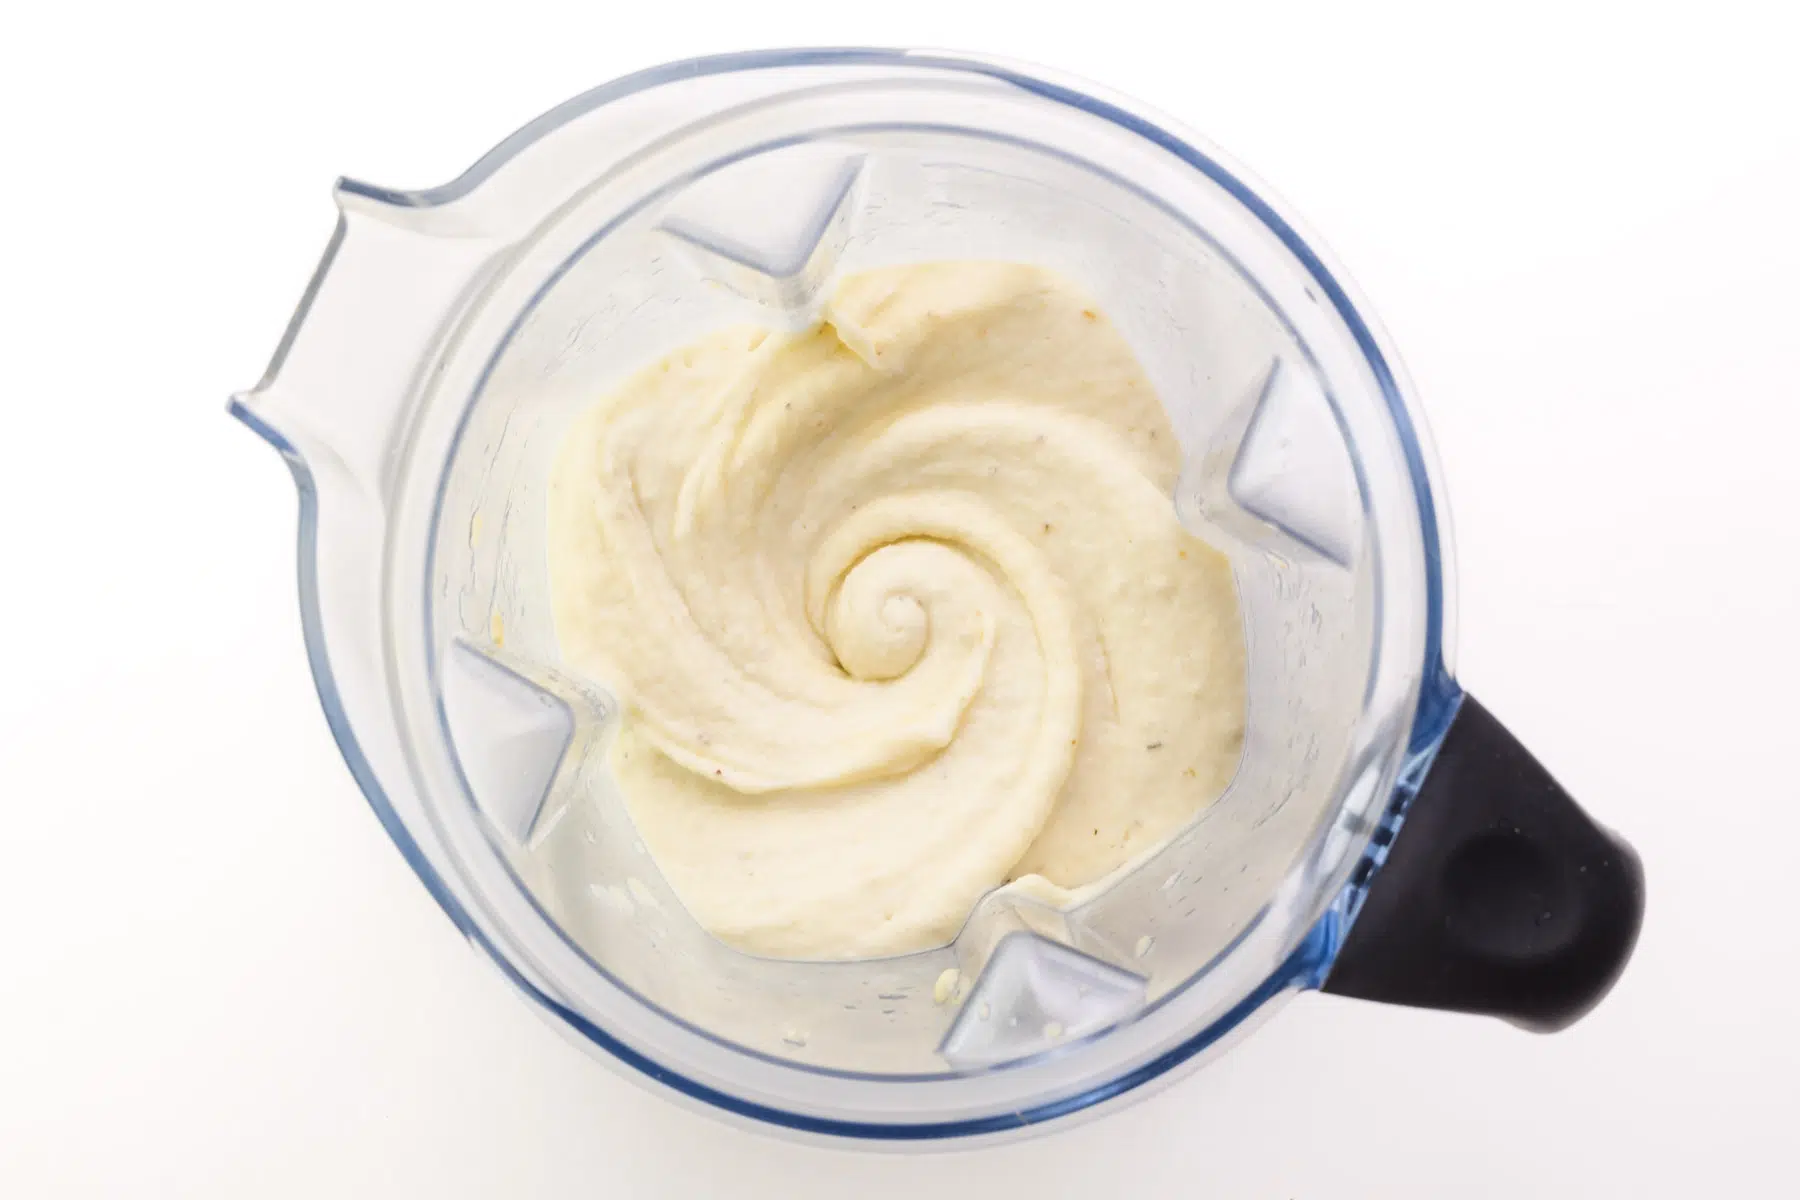 A creamy frozen banana mixture is in the bottom of a blender.